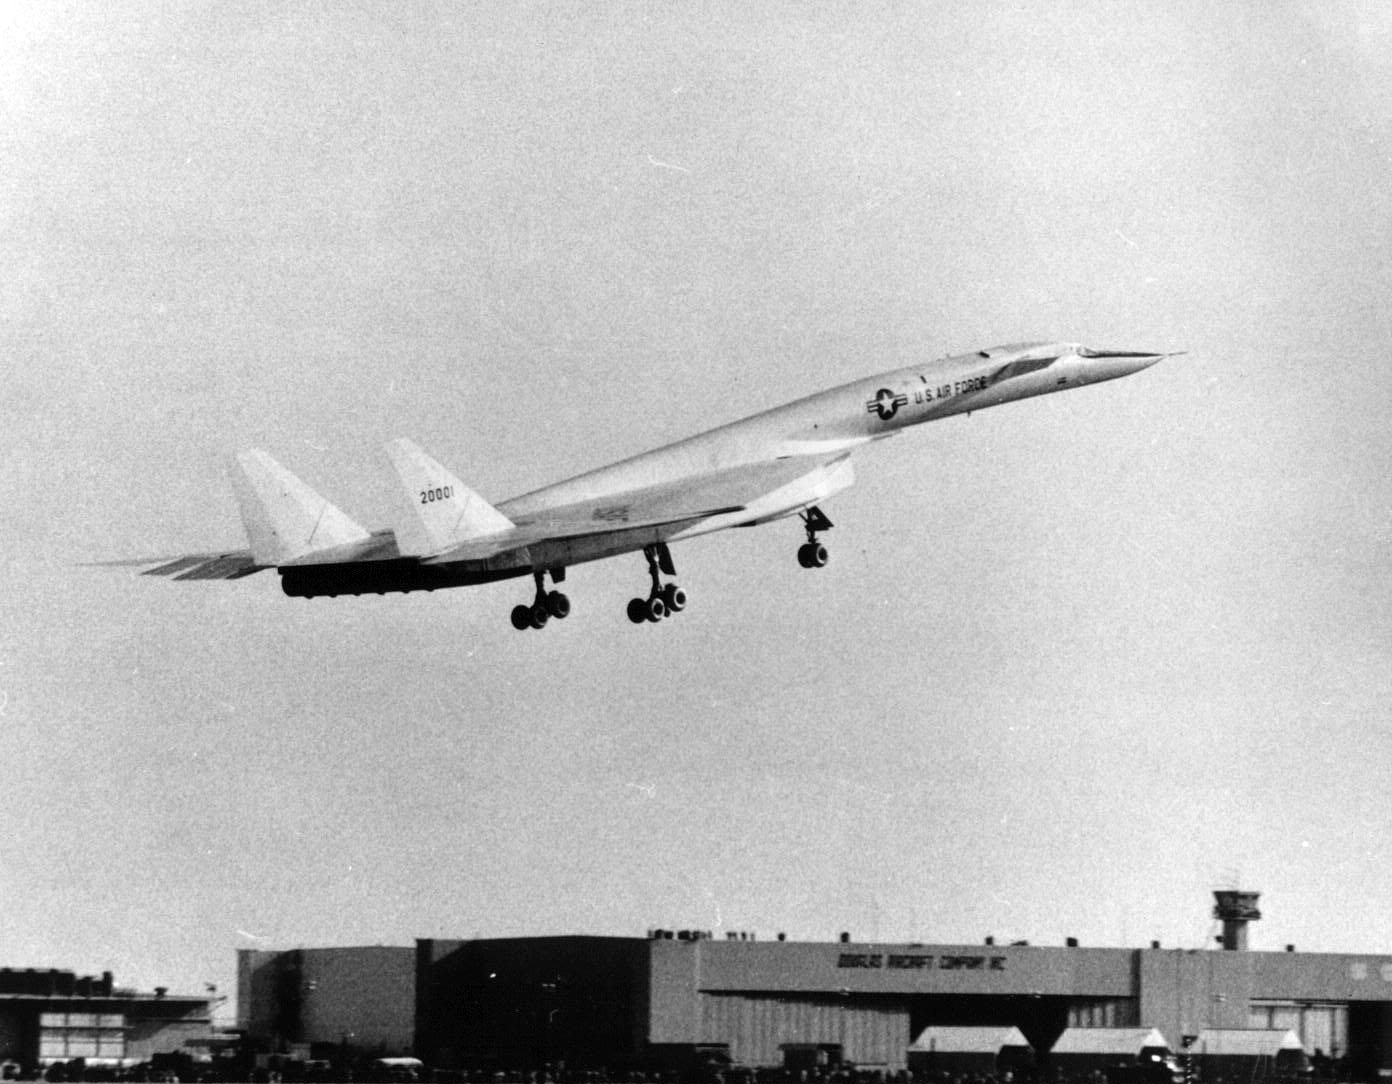 North American Aviation XB70A-1-NA 62-001 takes off for the first time, 21 September 1964. (U.S. Air Force)